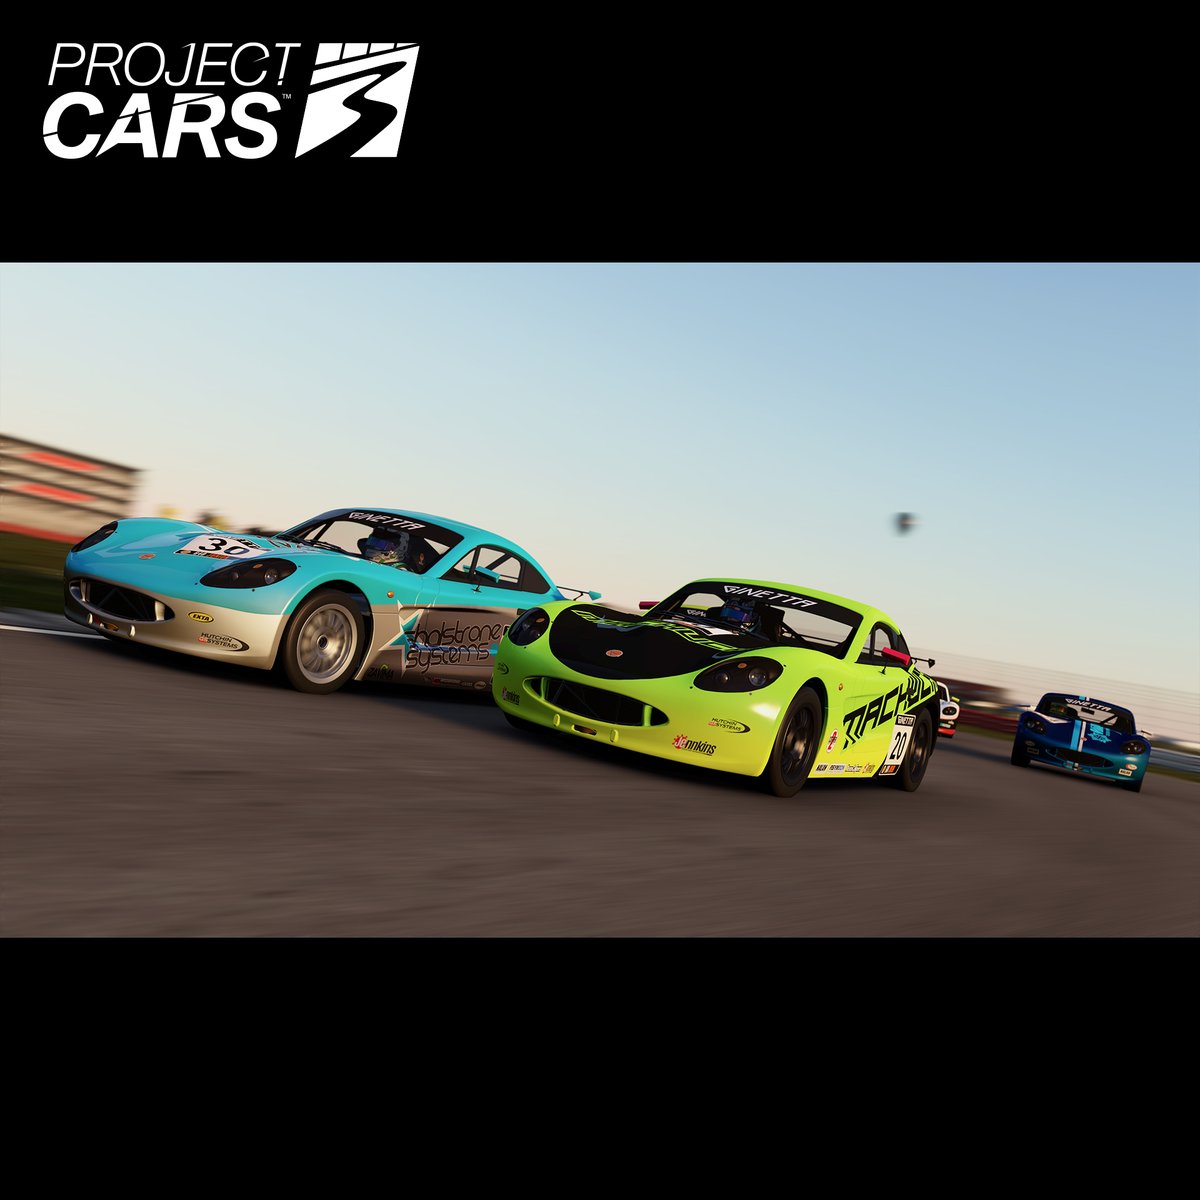 projectcarsgame tweet picture